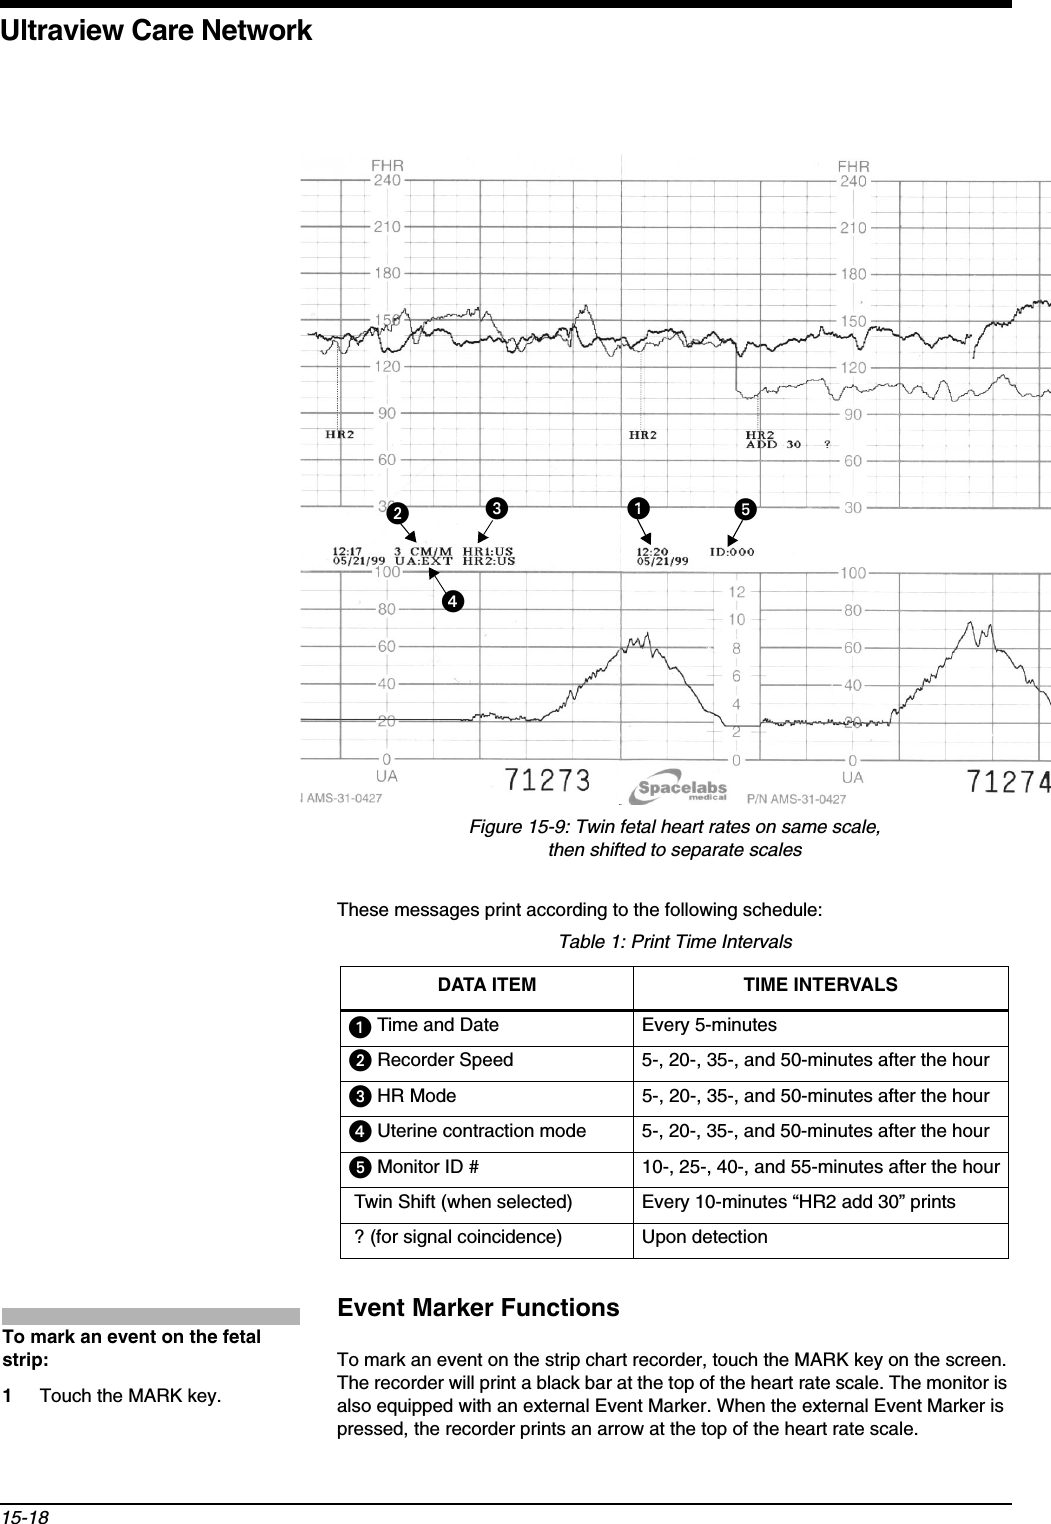 Ultraview Care Network15-18Figure 15-9: Twin fetal heart rates on same scale, then shifted to separate scalesThese messages print according to the following schedule:Event Marker FunctionsTo mark an event on the strip chart recorder, touch the MARK key on the screen. The recorder will print a black bar at the top of the heart rate scale. The monitor is also equipped with an external Event Marker. When the external Event Marker is pressed, the recorder prints an arrow at the top of the heart rate scale.Table 1: Print Time IntervalsDATA ITEM  TIME INTERVALSᕡ Time and Date Every 5-minutesᕢ Recorder Speed 5-, 20-, 35-, and 50-minutes after the hourᕣ HR Mode 5-, 20-, 35-, and 50-minutes after the hourᕤ Uterine contraction mode 5-, 20-, 35-, and 50-minutes after the hourᕥ Monitor ID # 10-, 25-, 40-, and 55-minutes after the hour Twin Shift (when selected) Every 10-minutes “HR2 add 30” prints ? (for signal coincidence) Upon detectionᕢᕣᕡᕤᕥTo mark an event on the fetal strip:1Touch the MARK key.